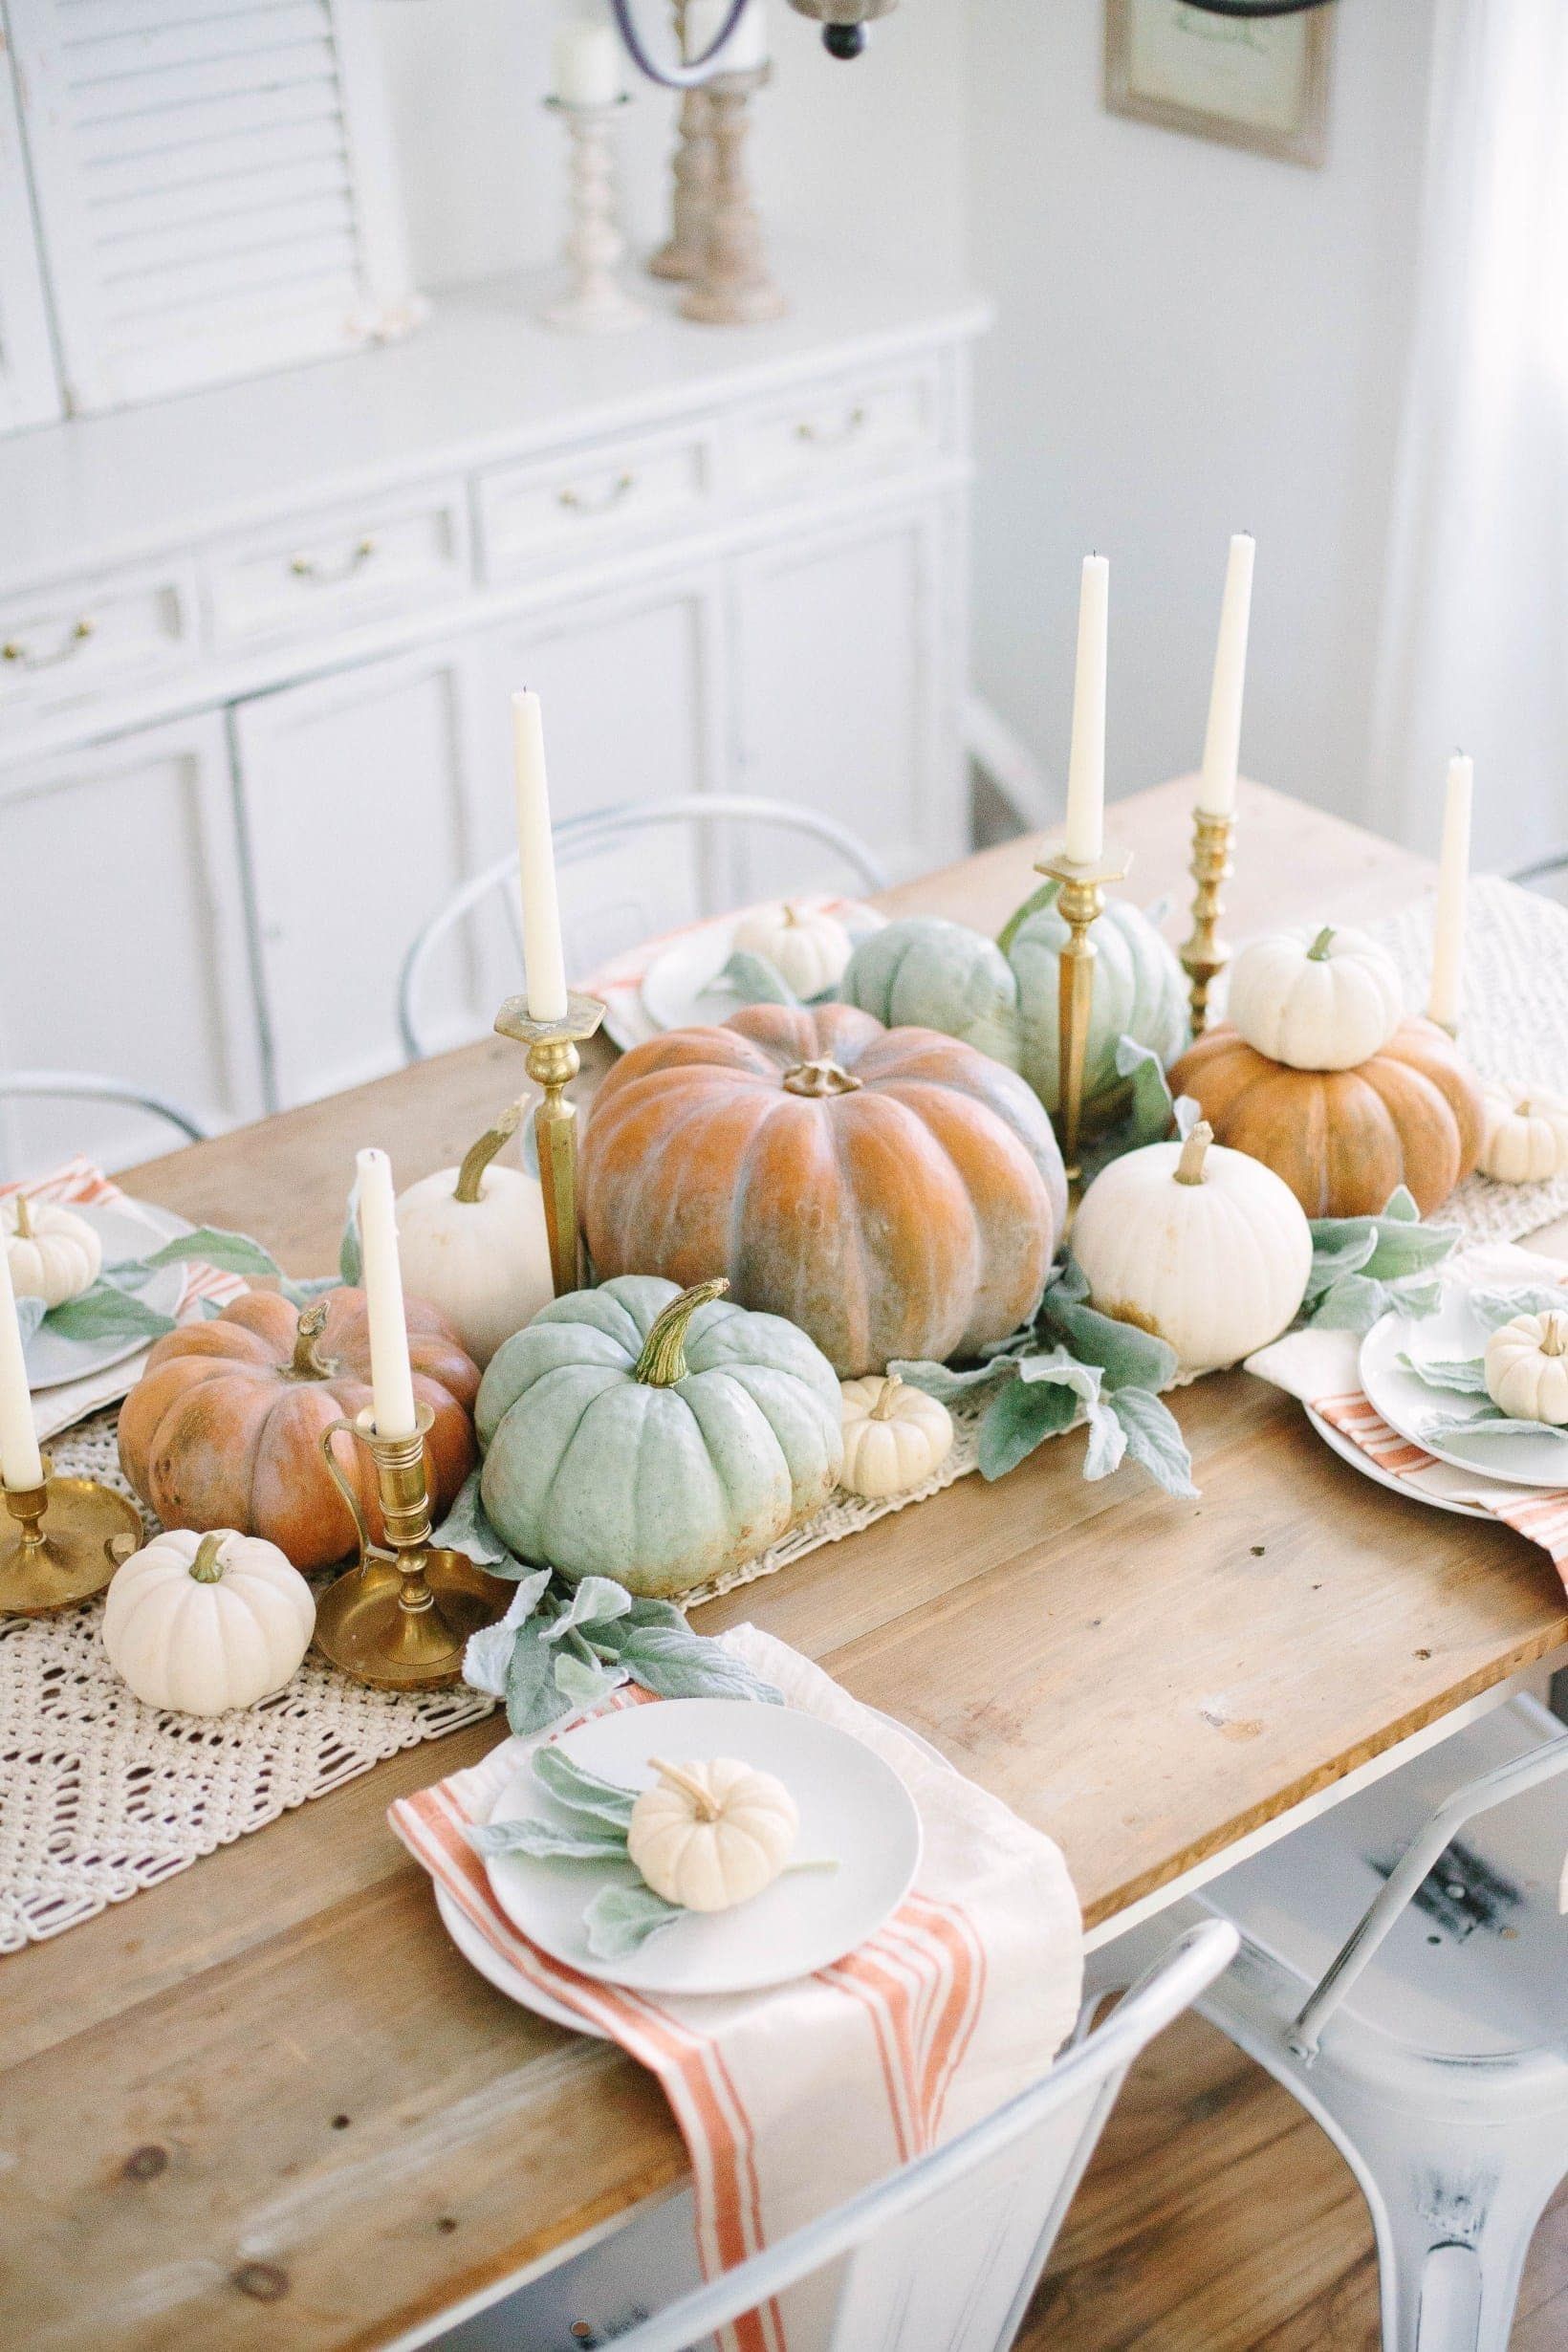 35 Thanksgiving Table Centerpieces That Are Seriously Gorgeous - 35 Thanksgiving Table Centerpieces That Are Seriously Gorgeous -   15 thanksgiving decorations table ideas